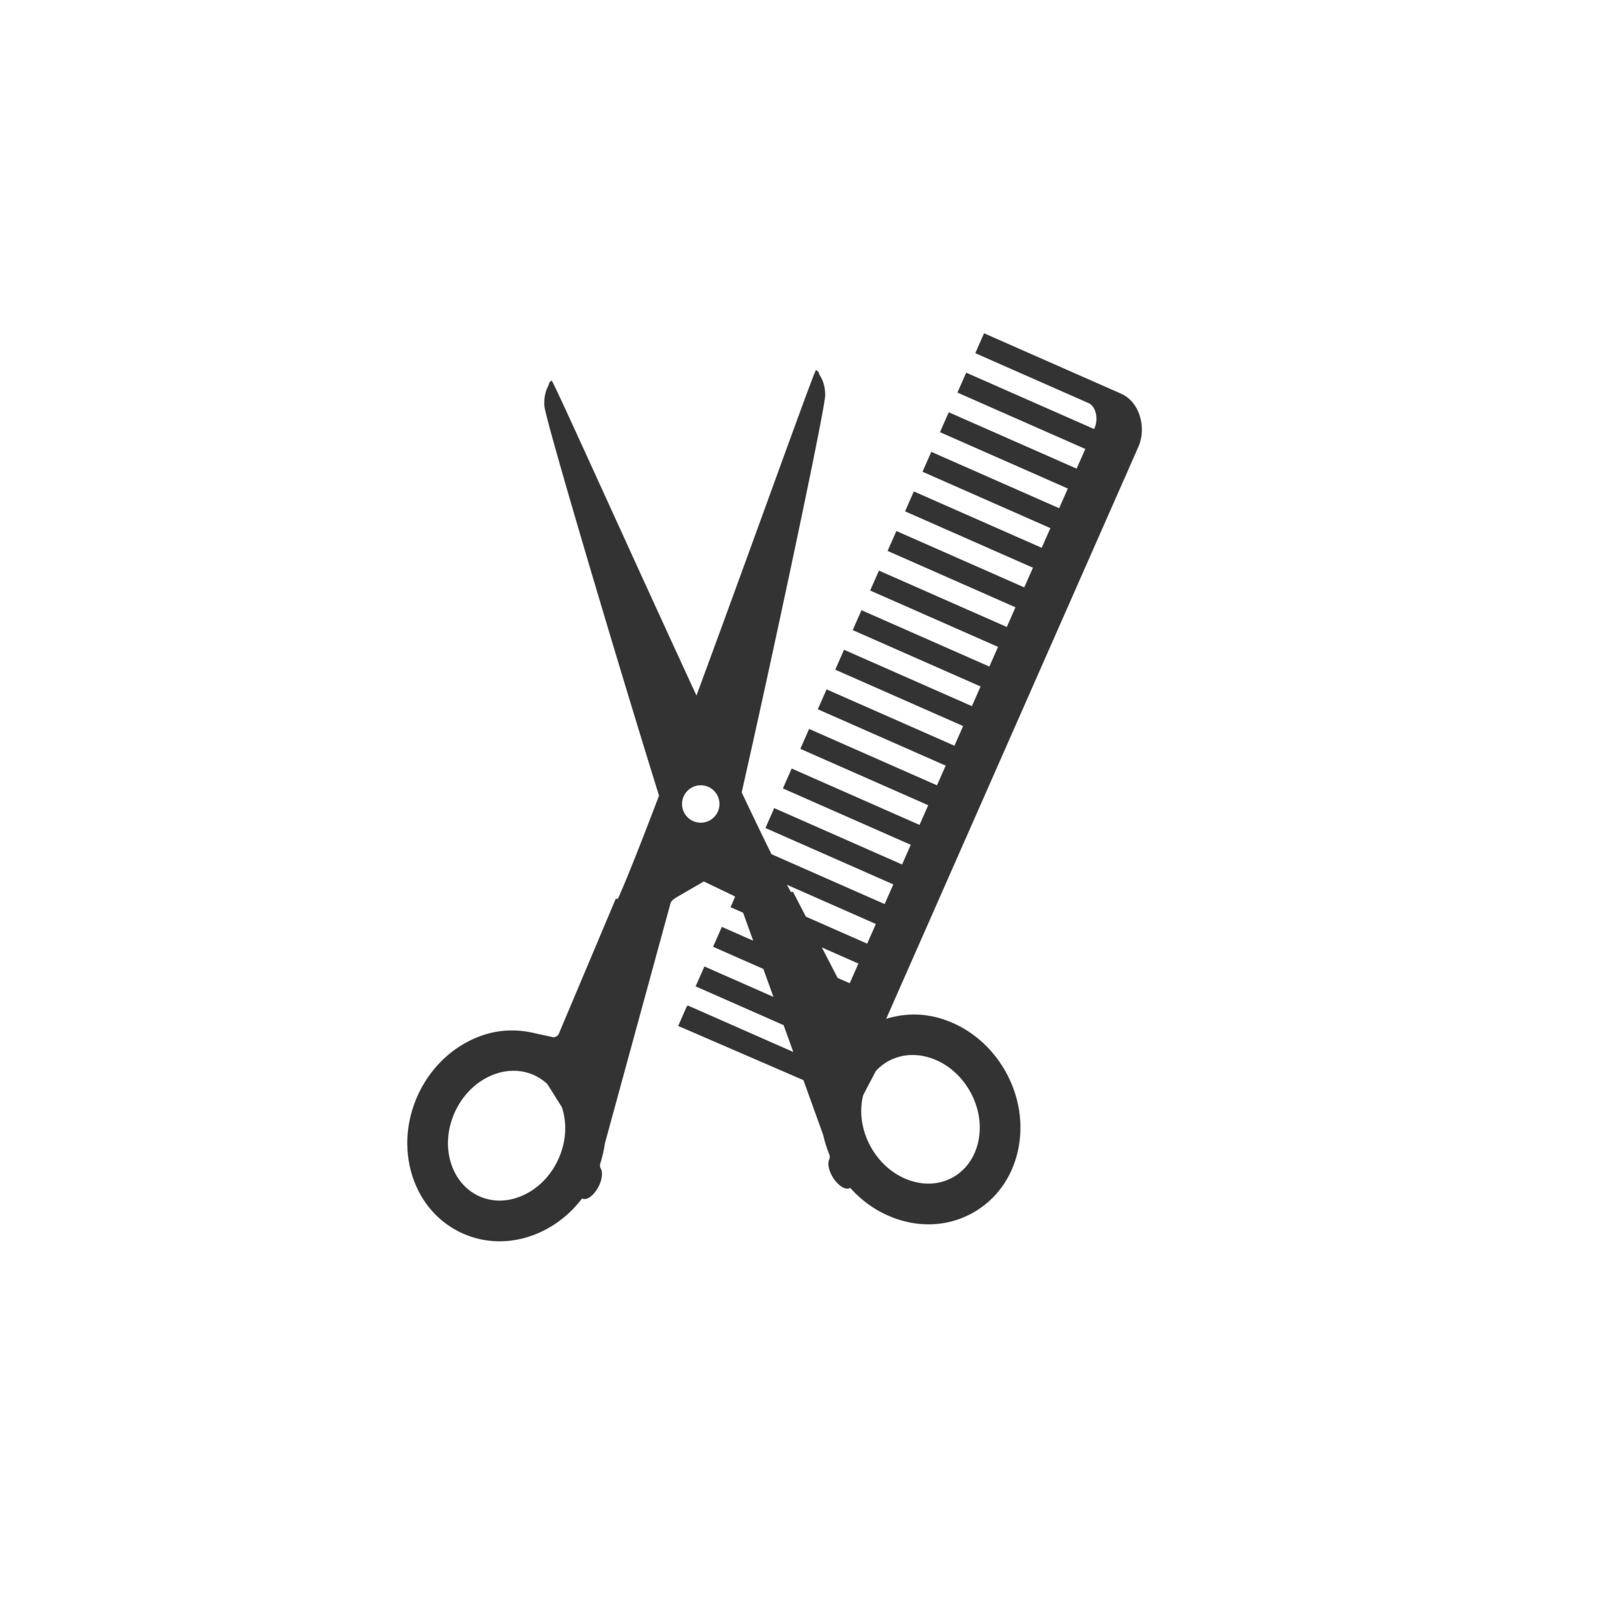 Scissors and comb icon. Vector illustration, flat design. by Vertyb